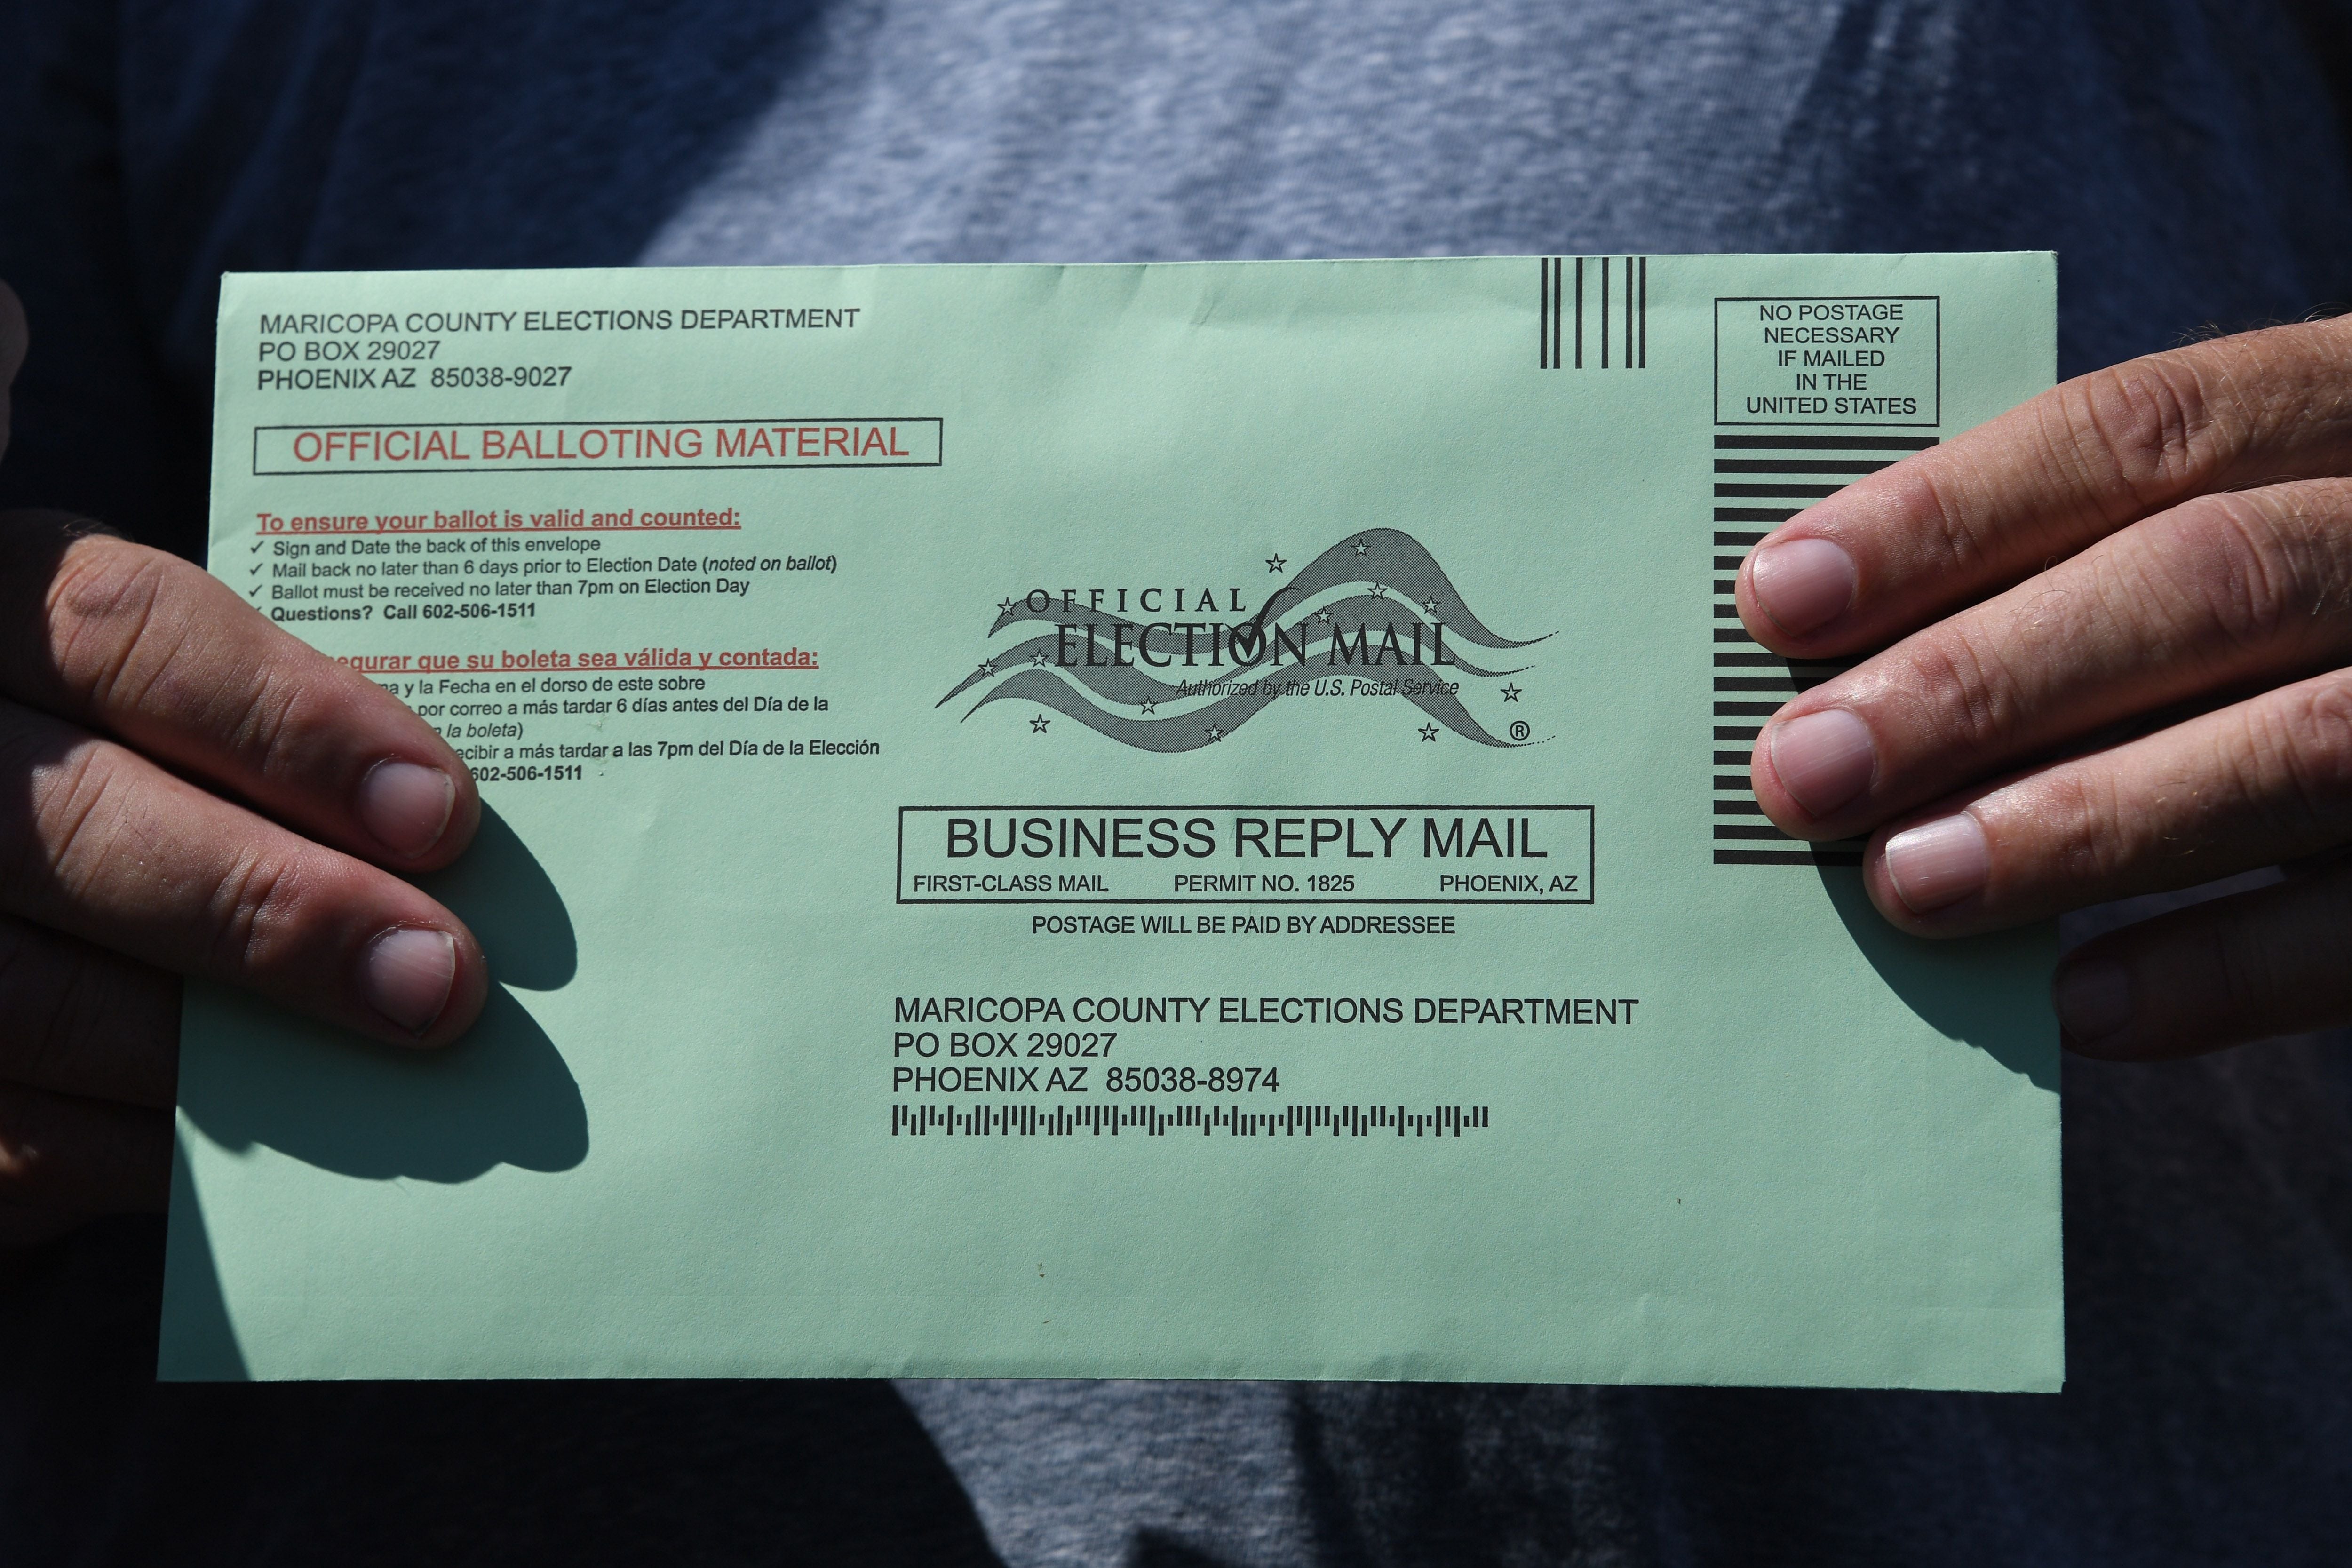 A closeup of someone’s hands holding a green envelope addressed to the Maricopa County Elections Department.